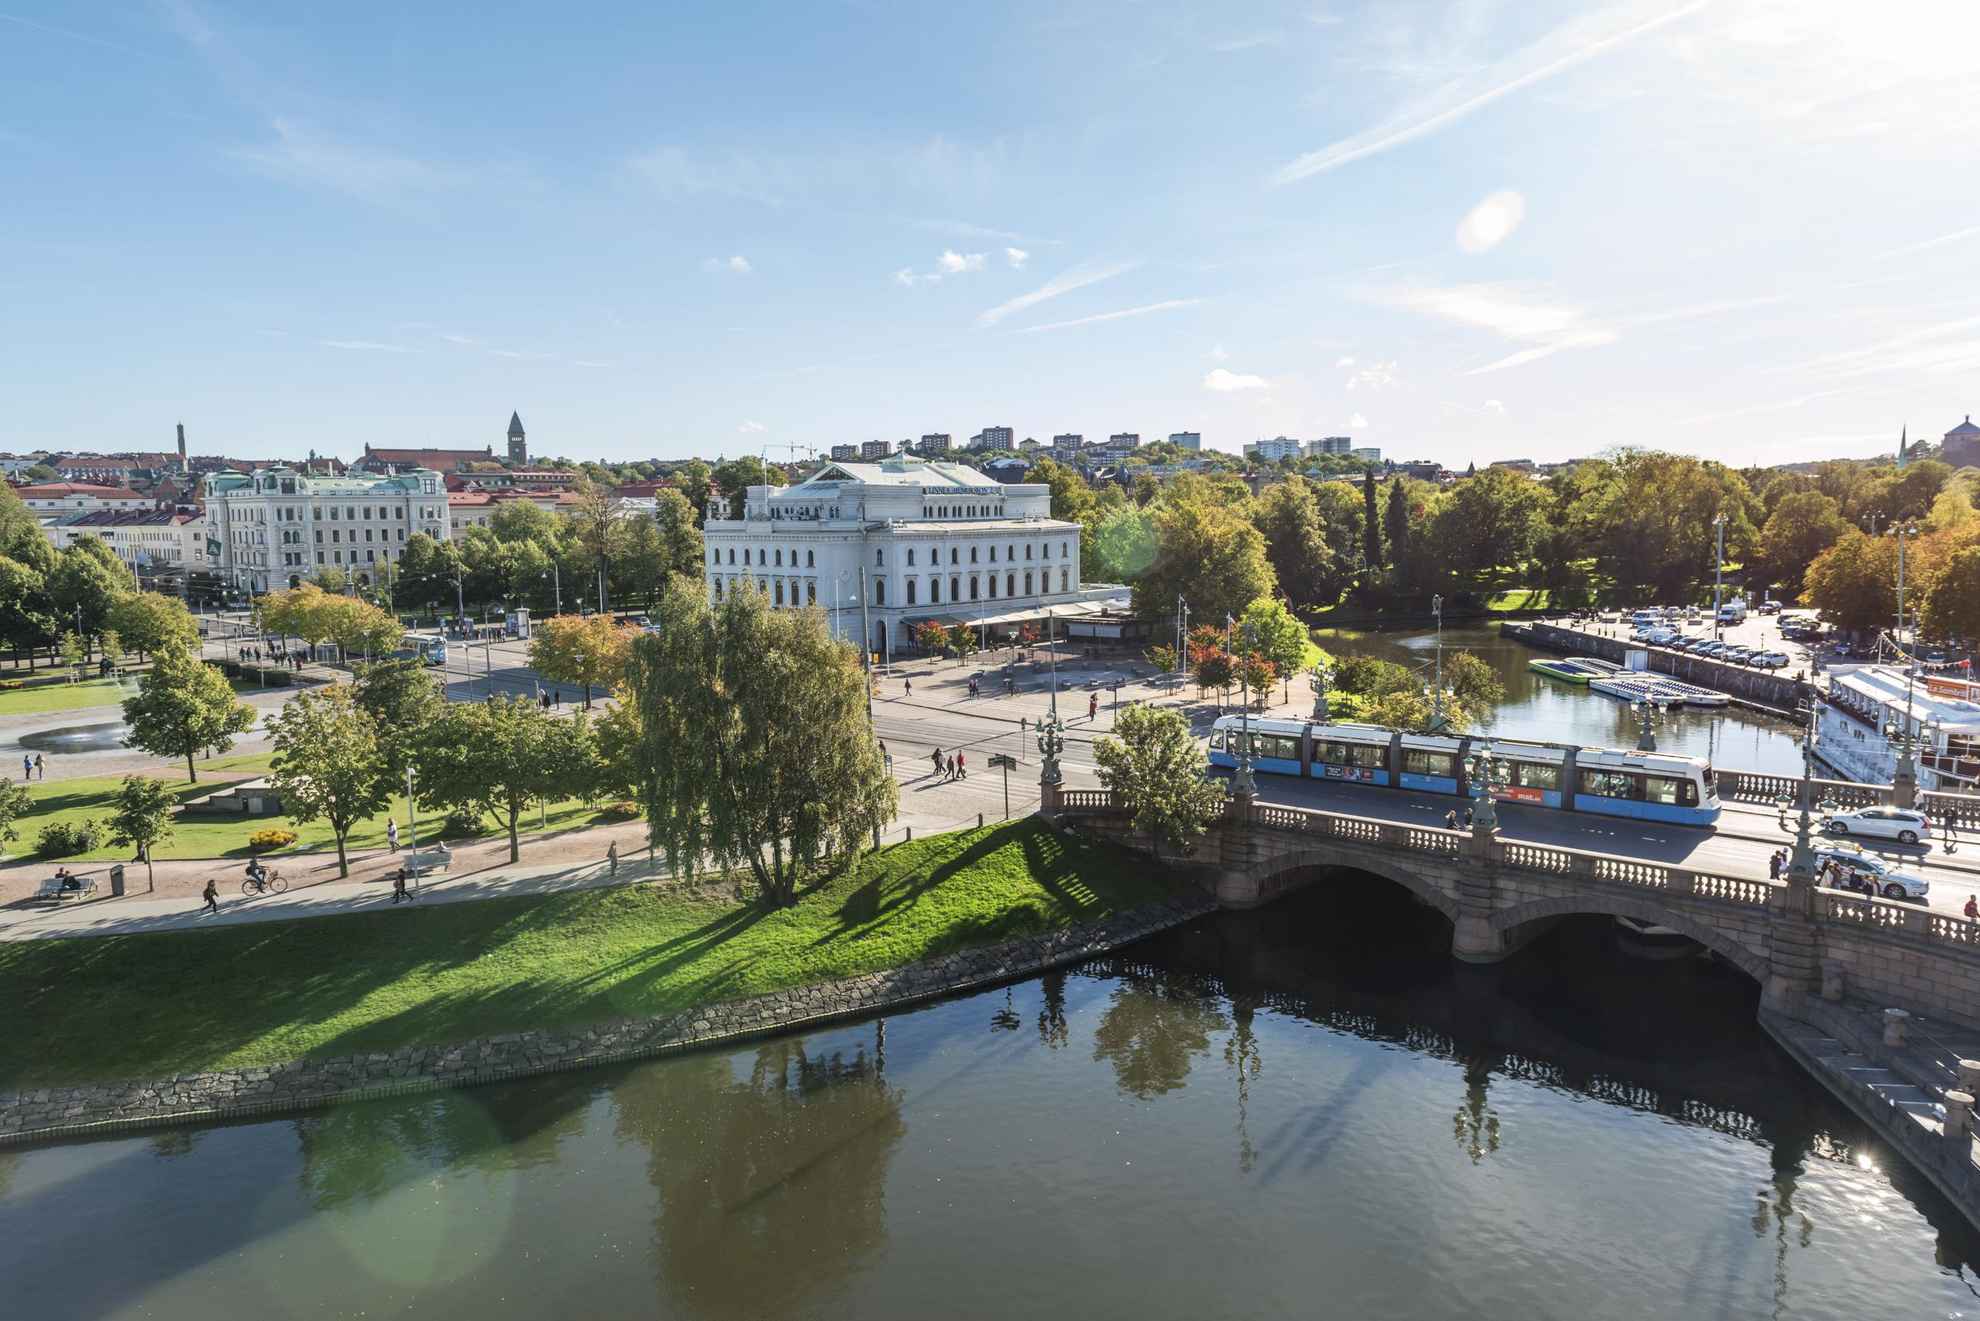 Aerial view of Kungsportsavenyn and the theatre Stora Teatern. A tram crosses the bridge Kungsportsbron. Green trees surround the streets.